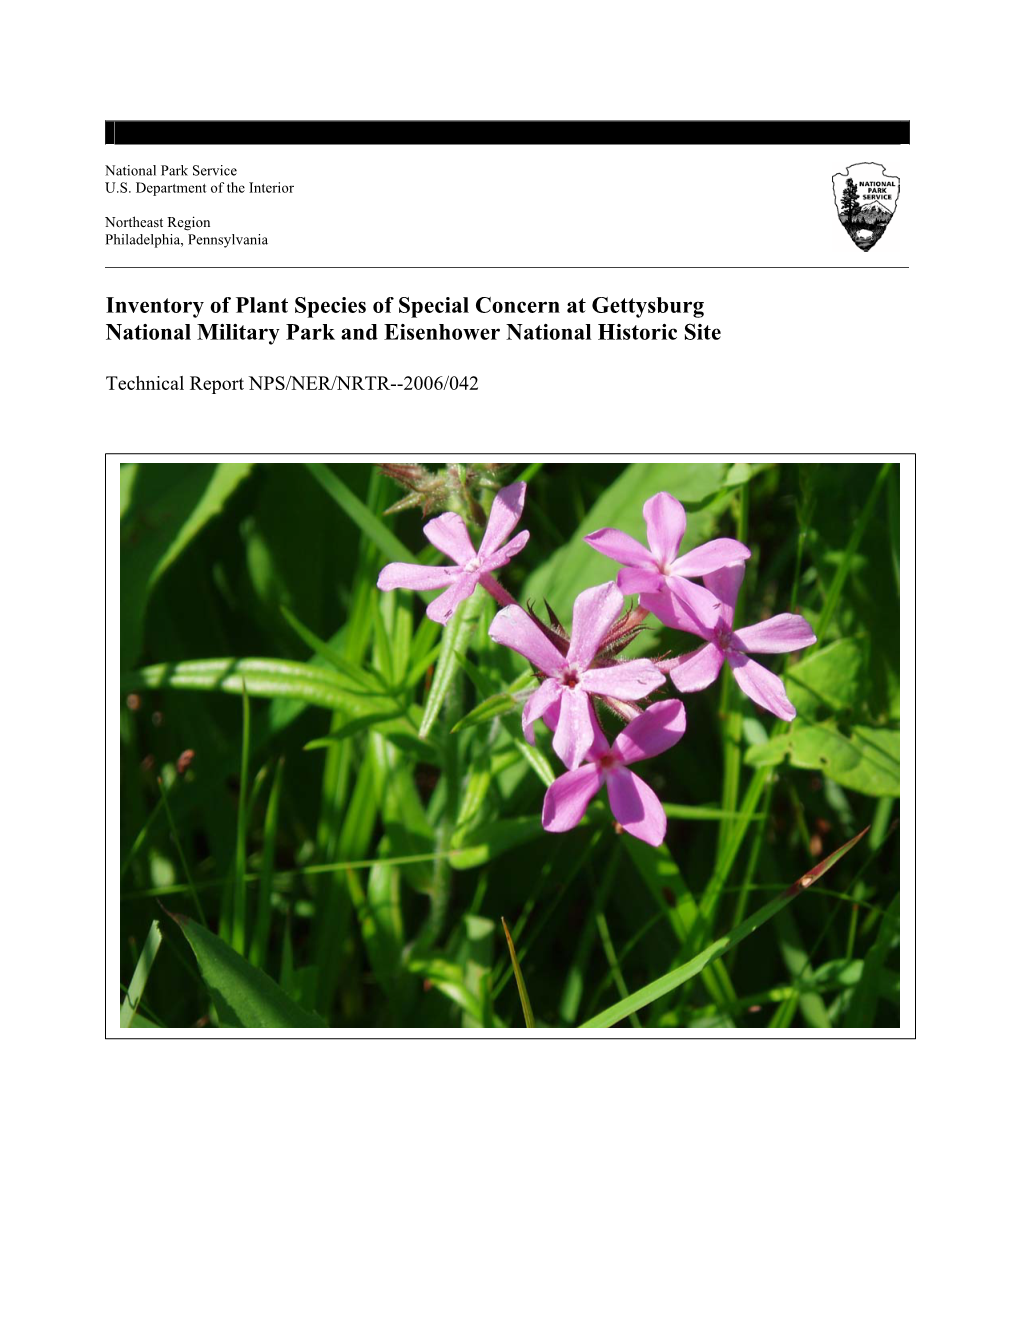 Inventory of Plant Species of Special Concern at Gettysburg National Military Park and Eisenhower National Historic Site